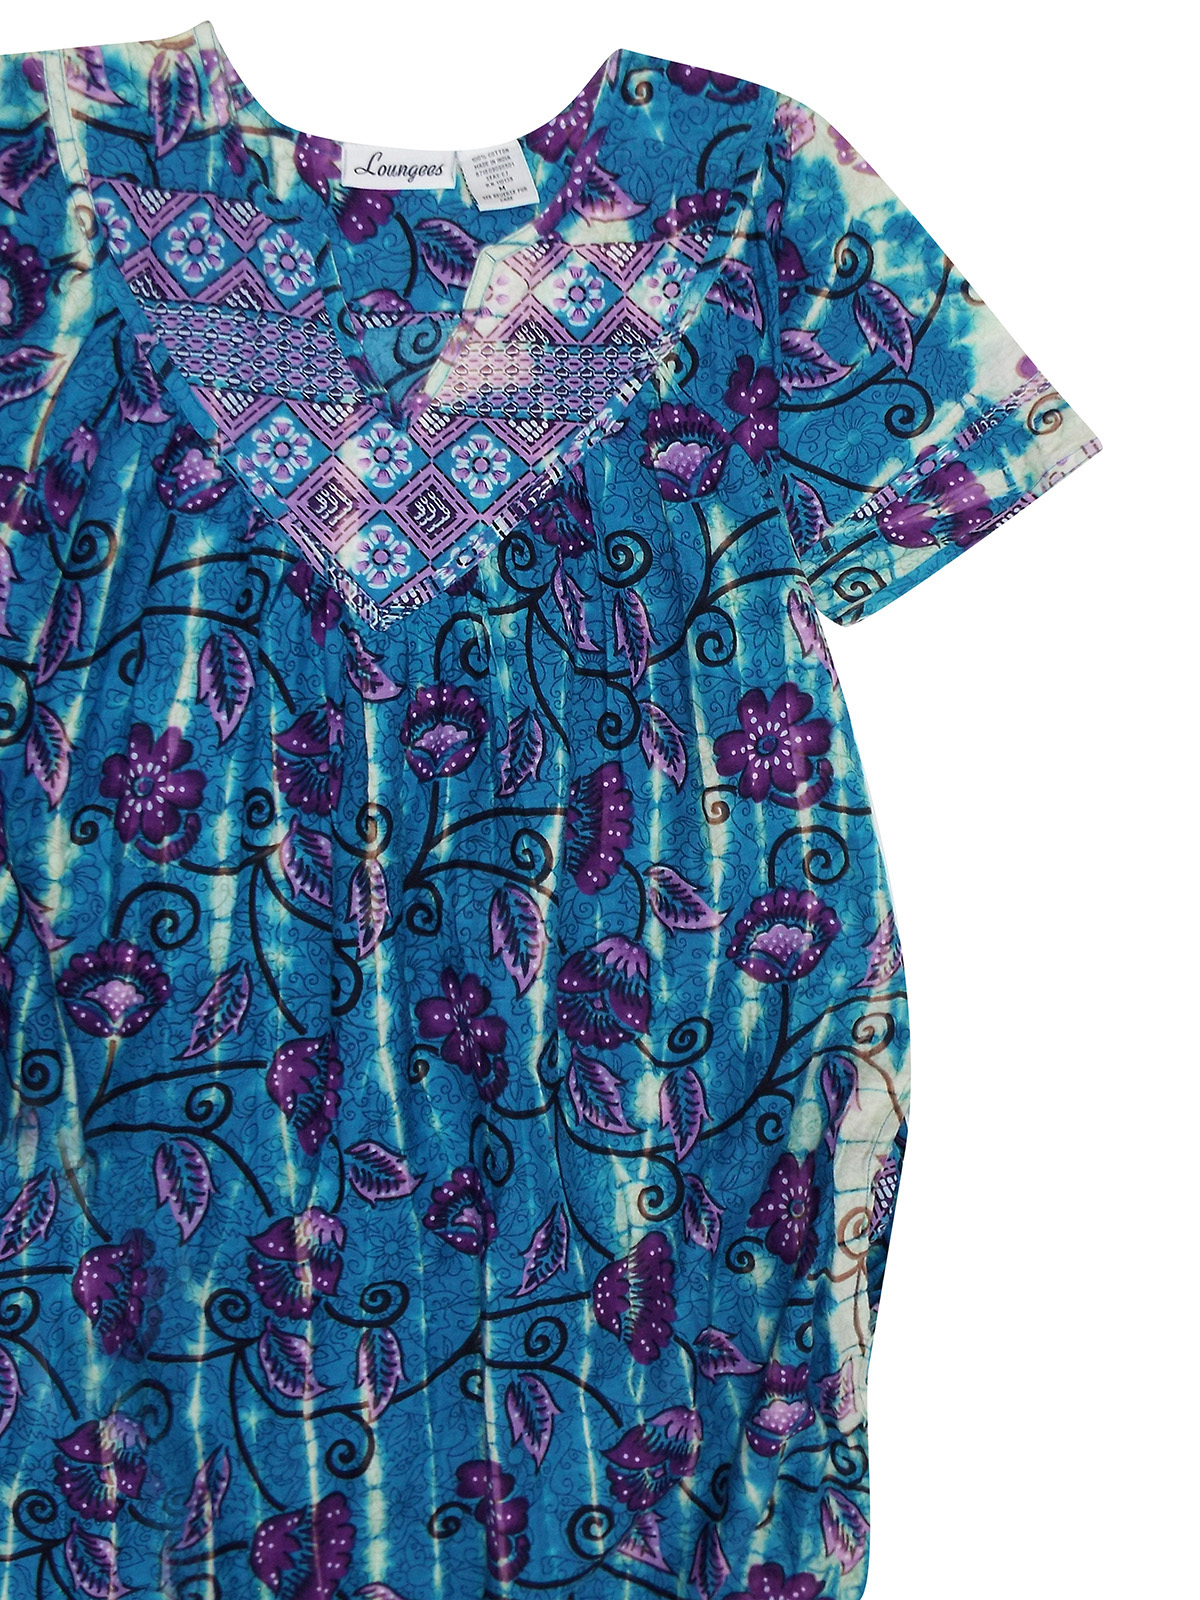 Plus Size Casual Lounge Dresses - - Loungees BLUE Printed Split Neck ...